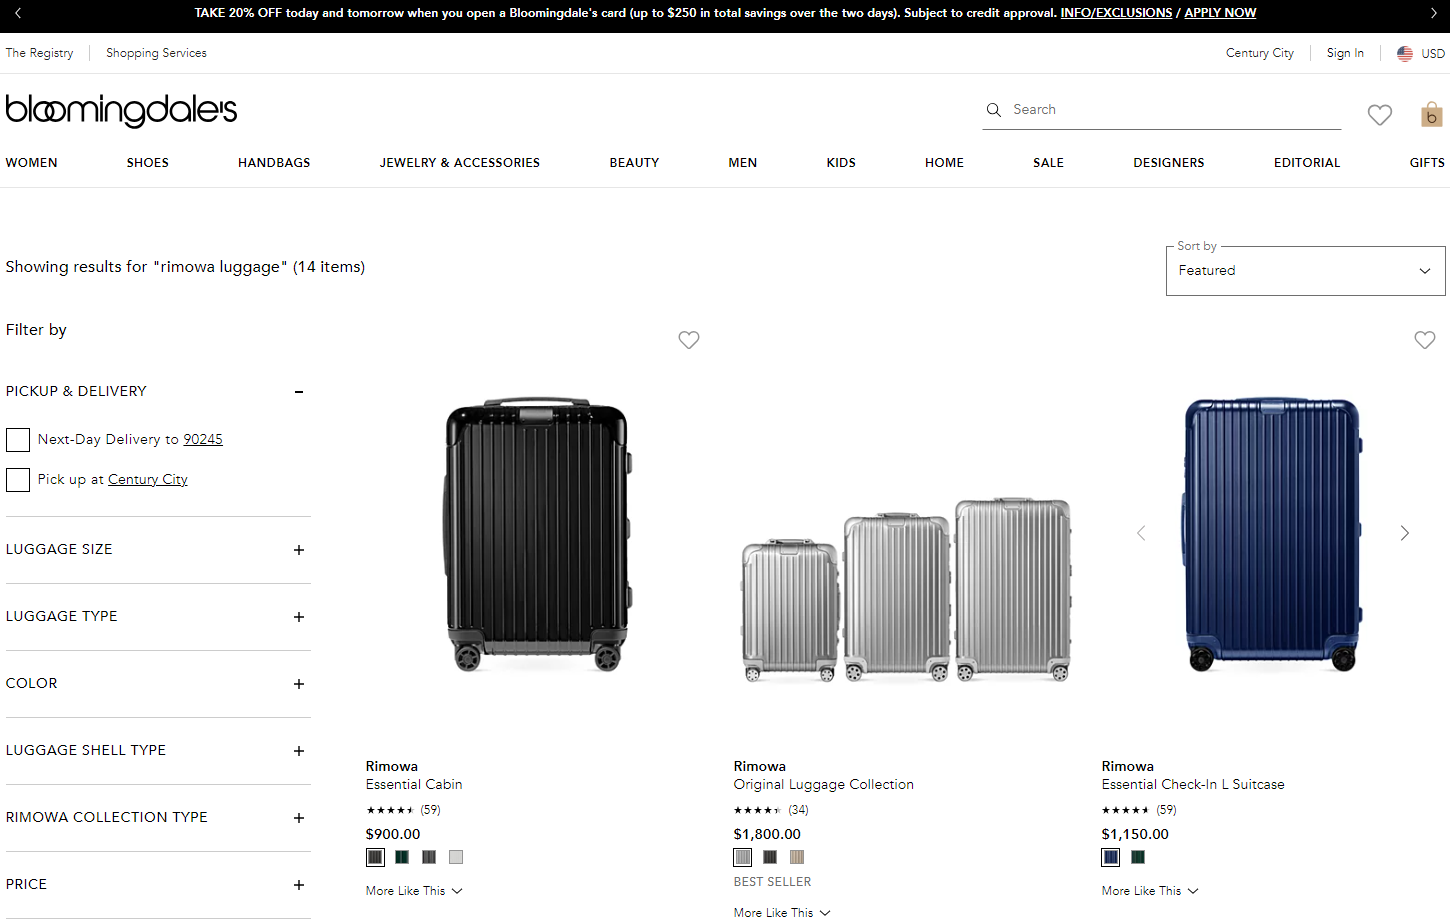 Where To Buy Rimowa The Cheapest In 2023? (Cheapest Country, Discount,  Price, VAT Rate & Tax Refund) - Extrabux